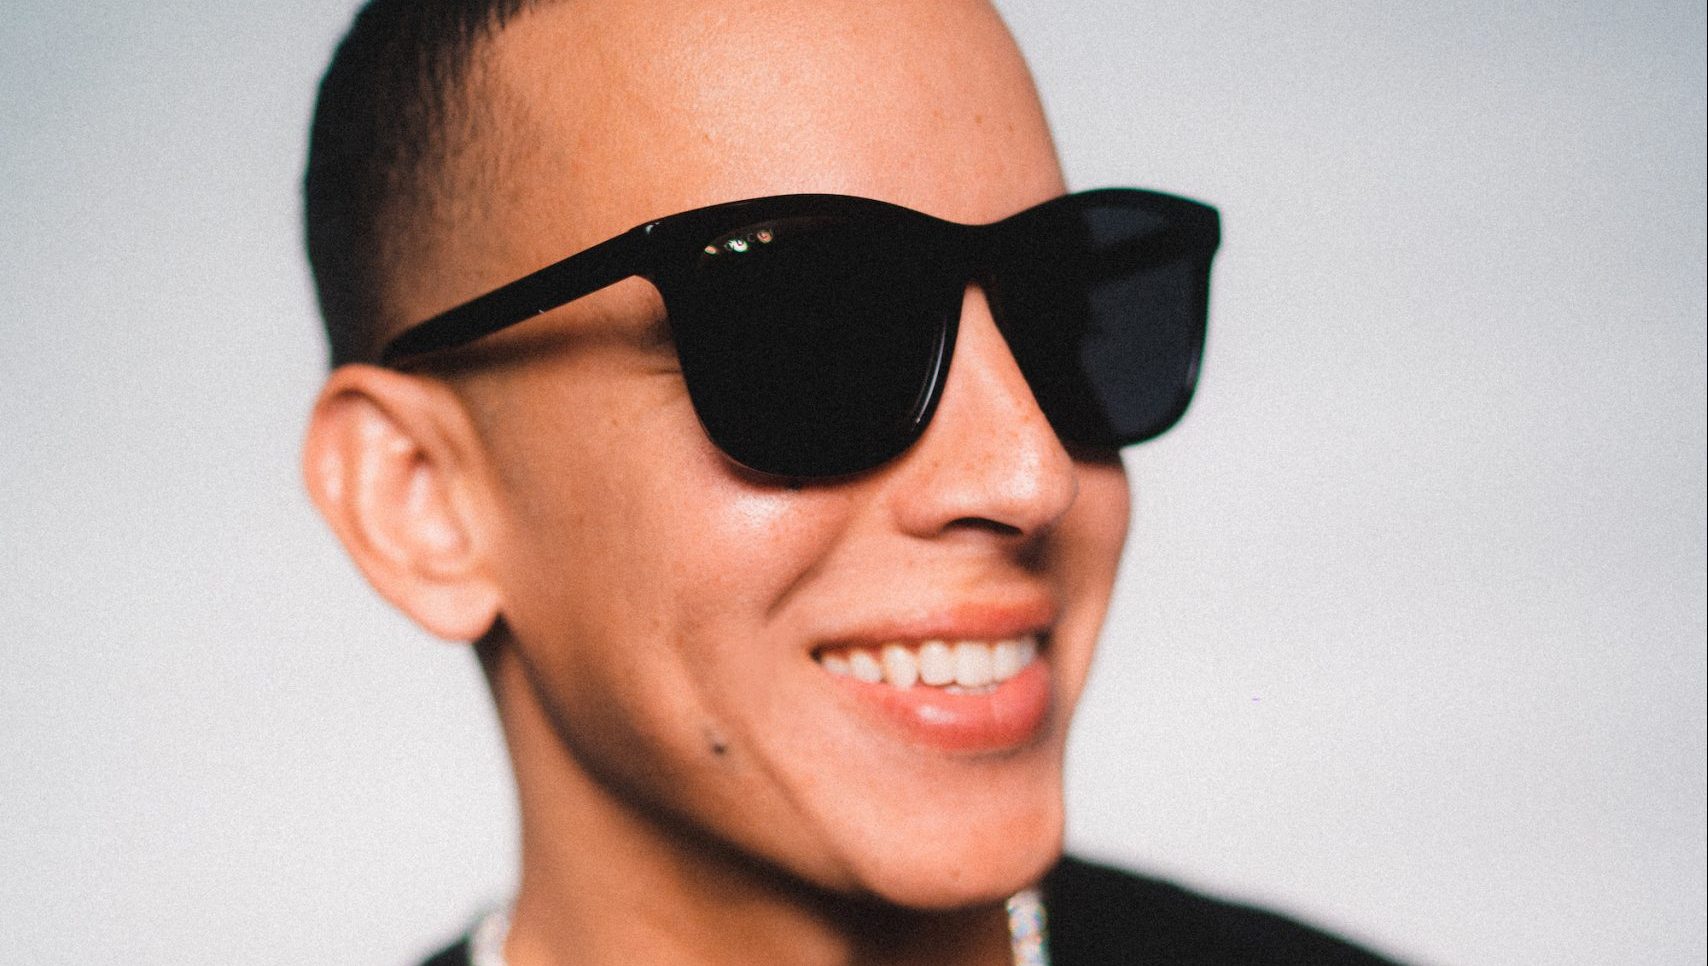 Daddy Yankee - News, Photos, Videos, and Movies or Albums